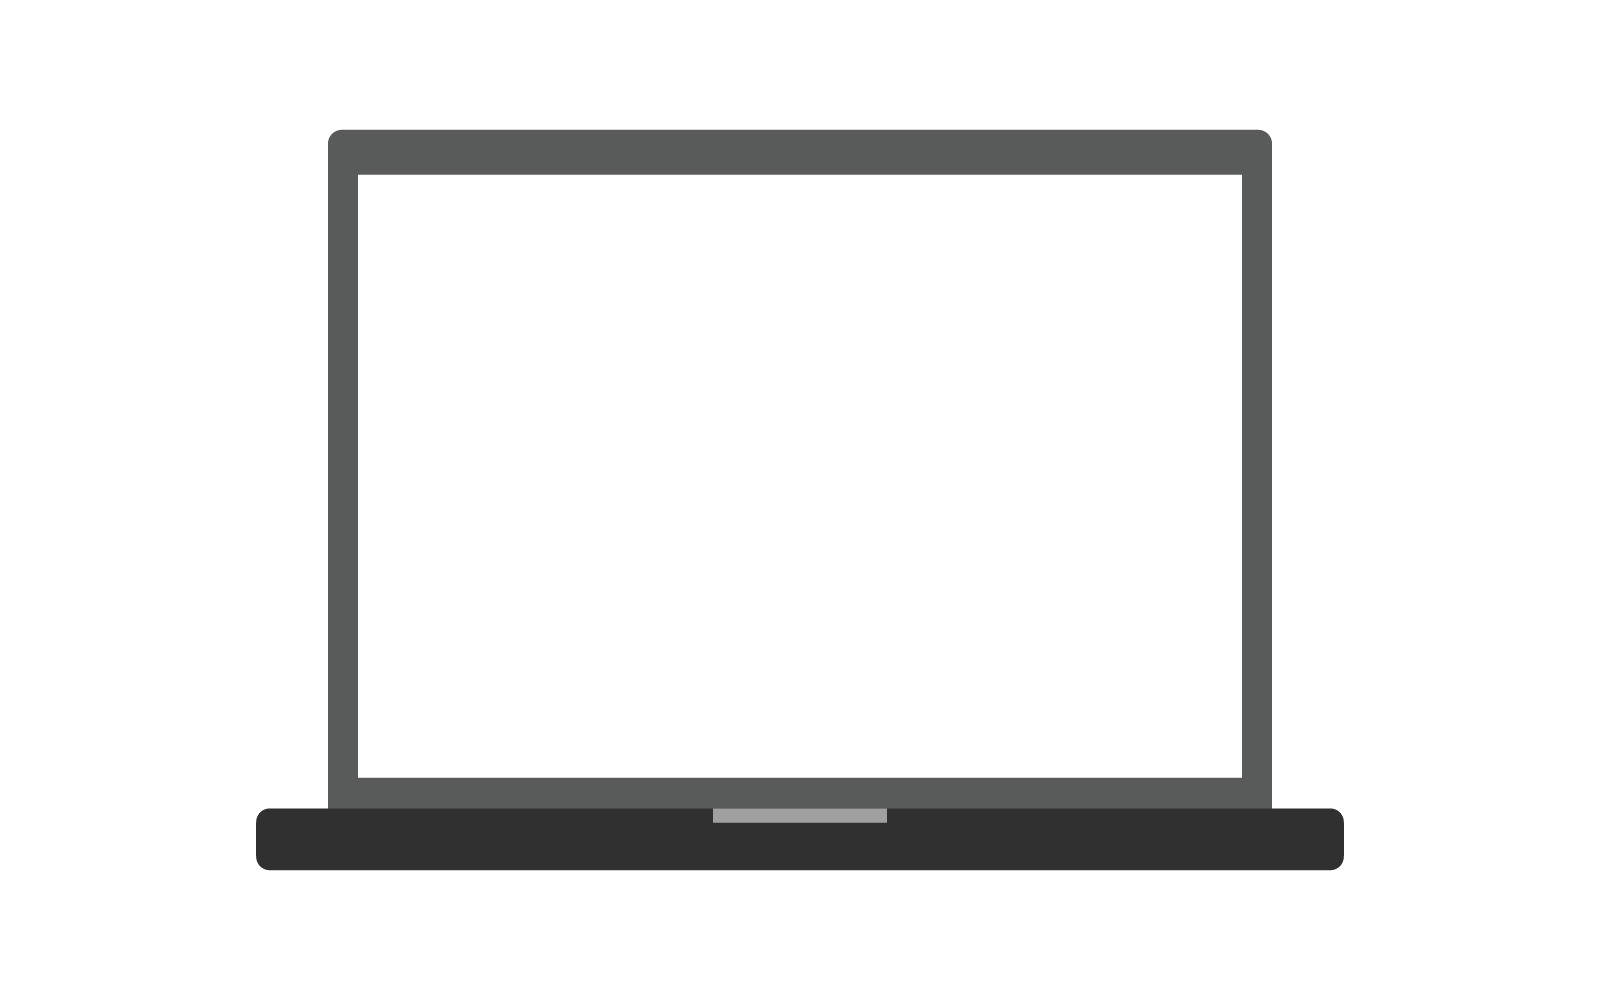 Laptop illustrated on a white background and colored in vector